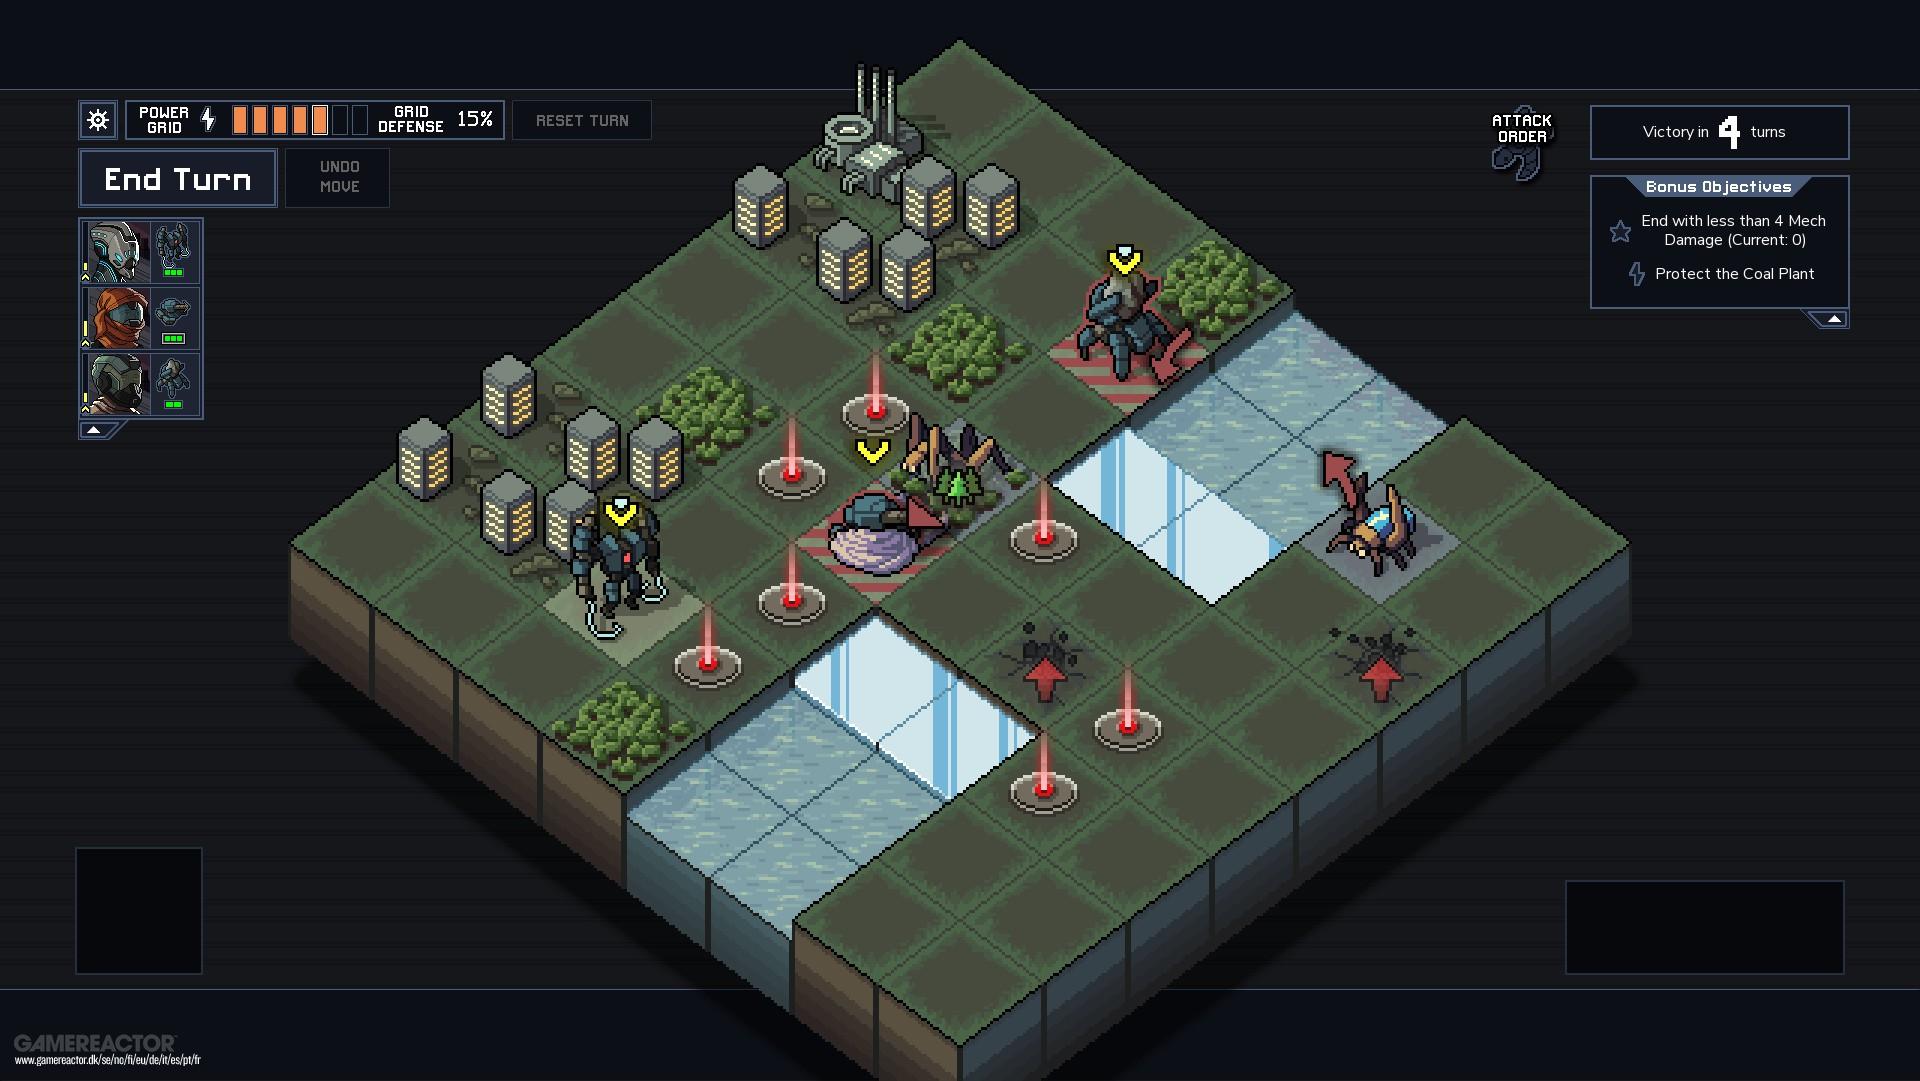 Netflix's Into the Breach screenshot of a dark setting with several buildings, fountains and what seems like a river.